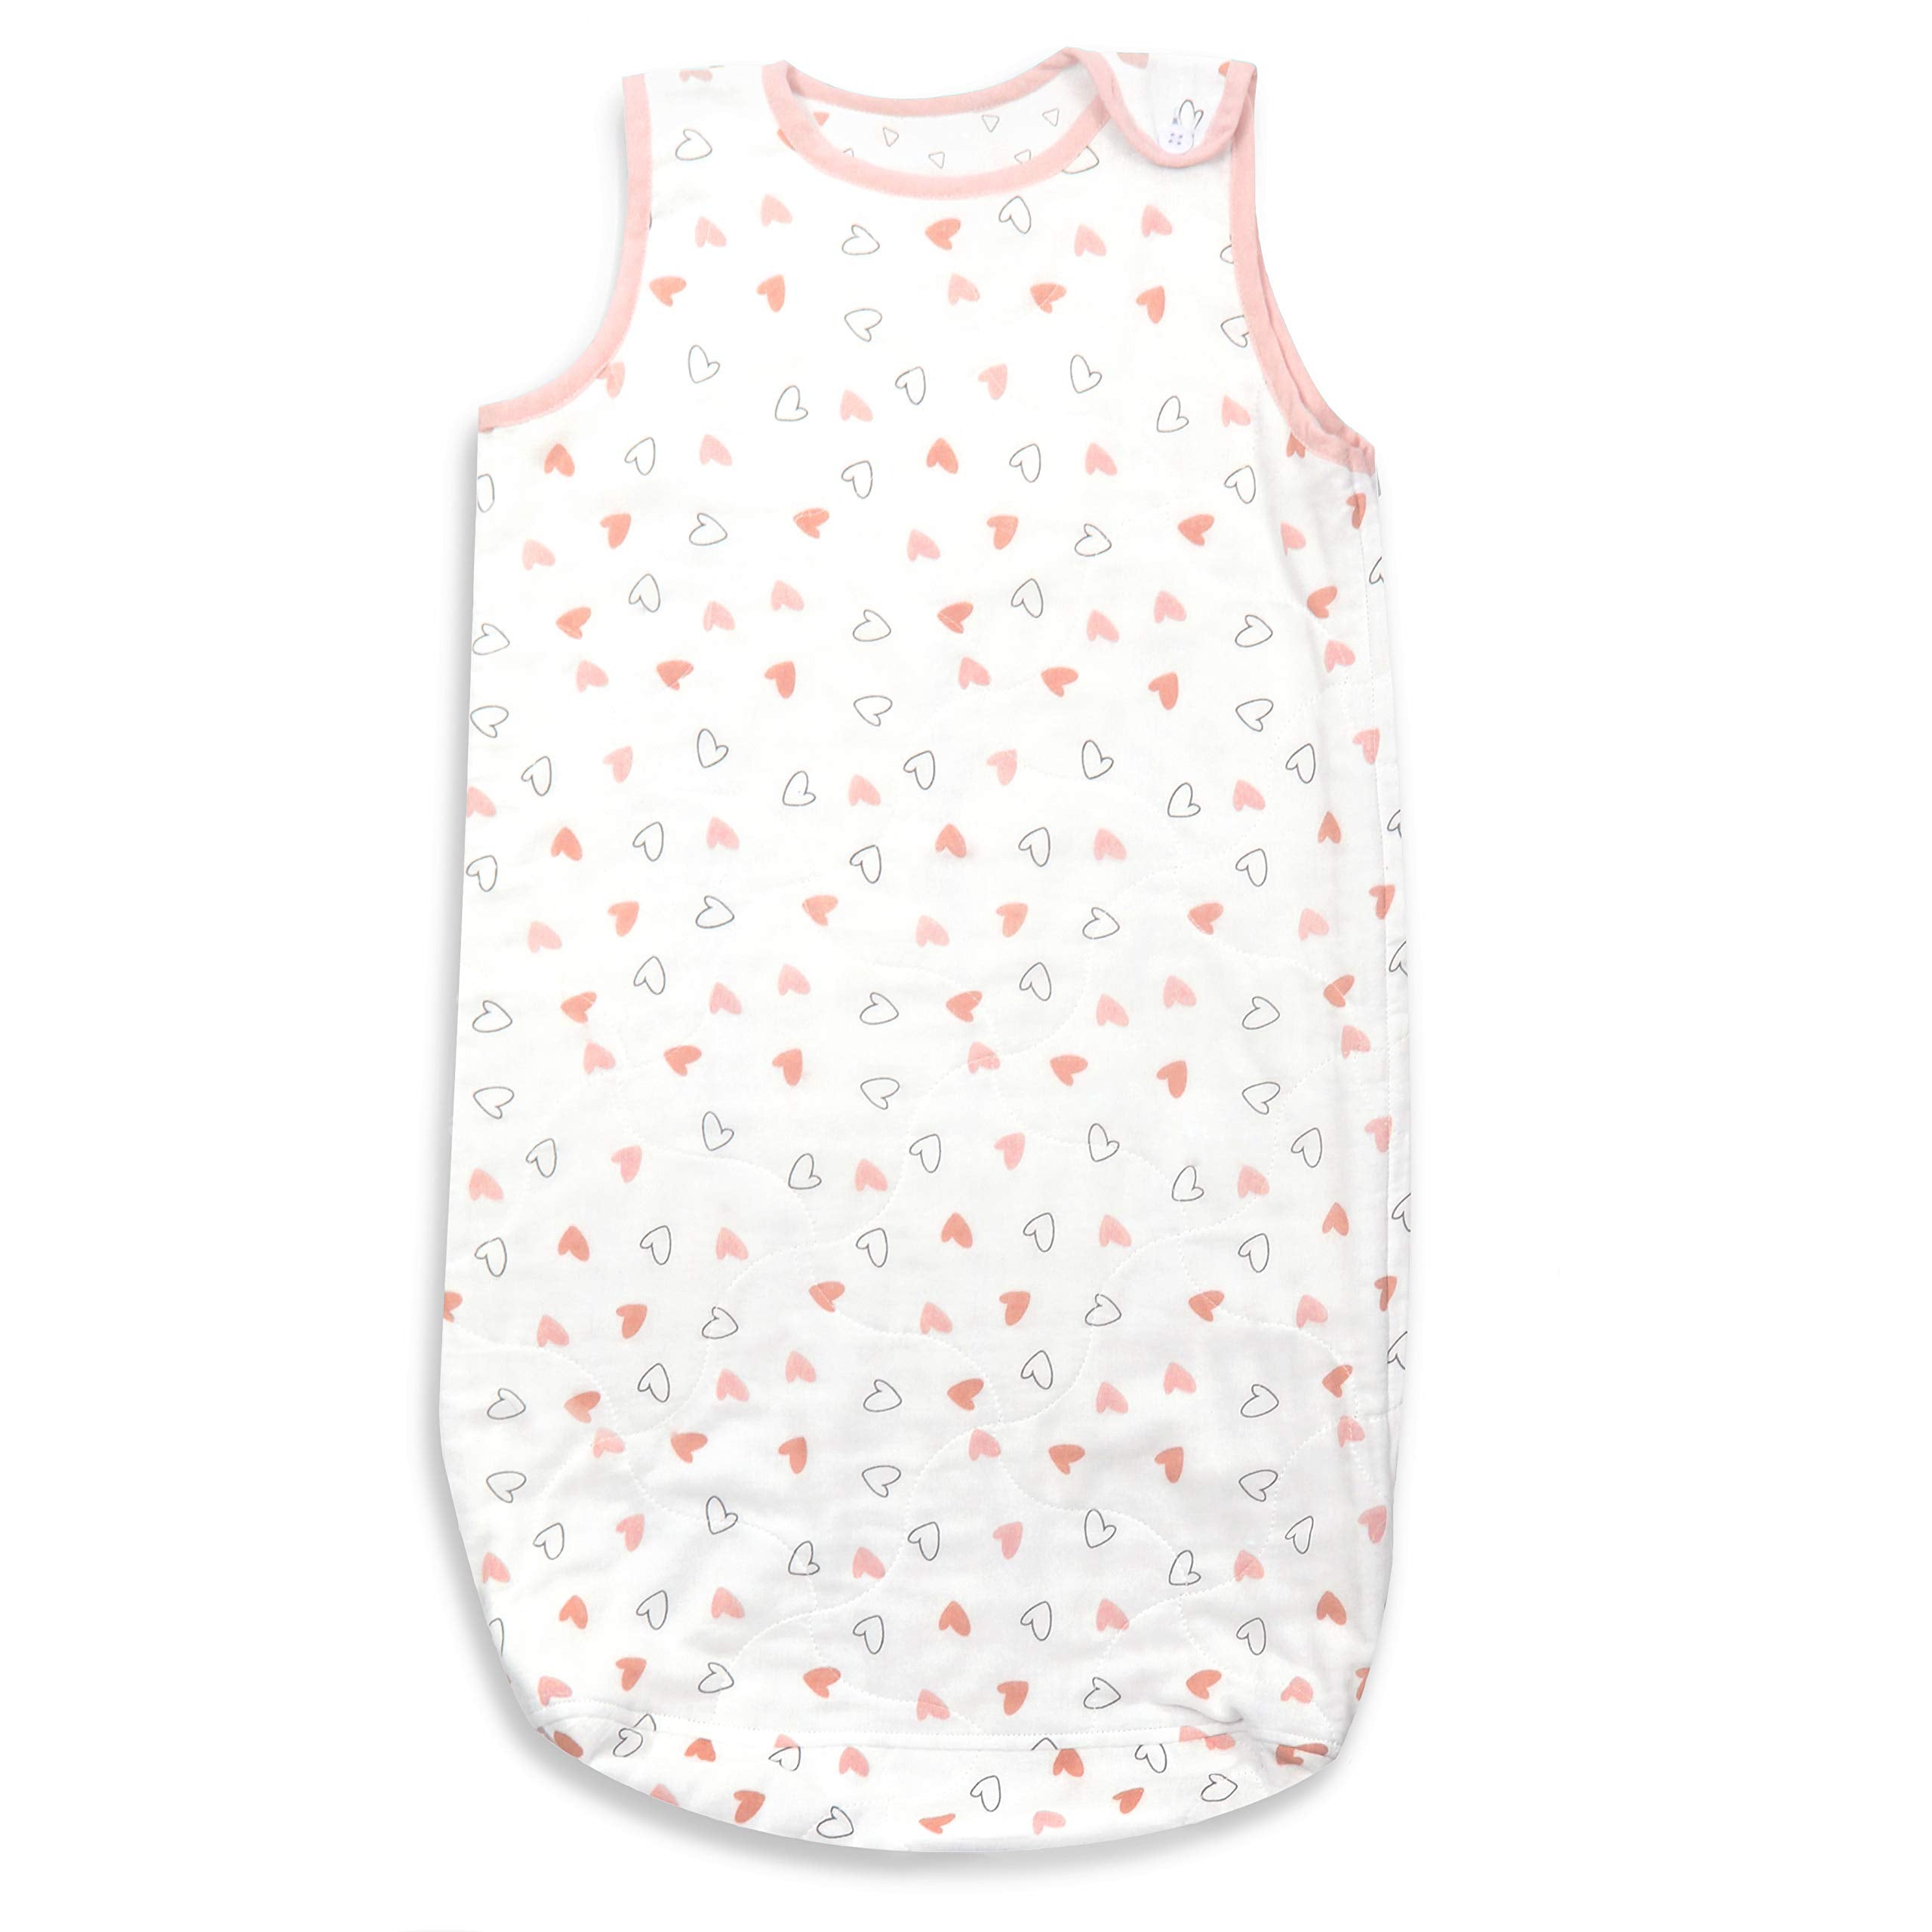 The White Cradle Baby Sleeping Bag for Infants & Newborns (Boys) - Pink Hearts & Triangles